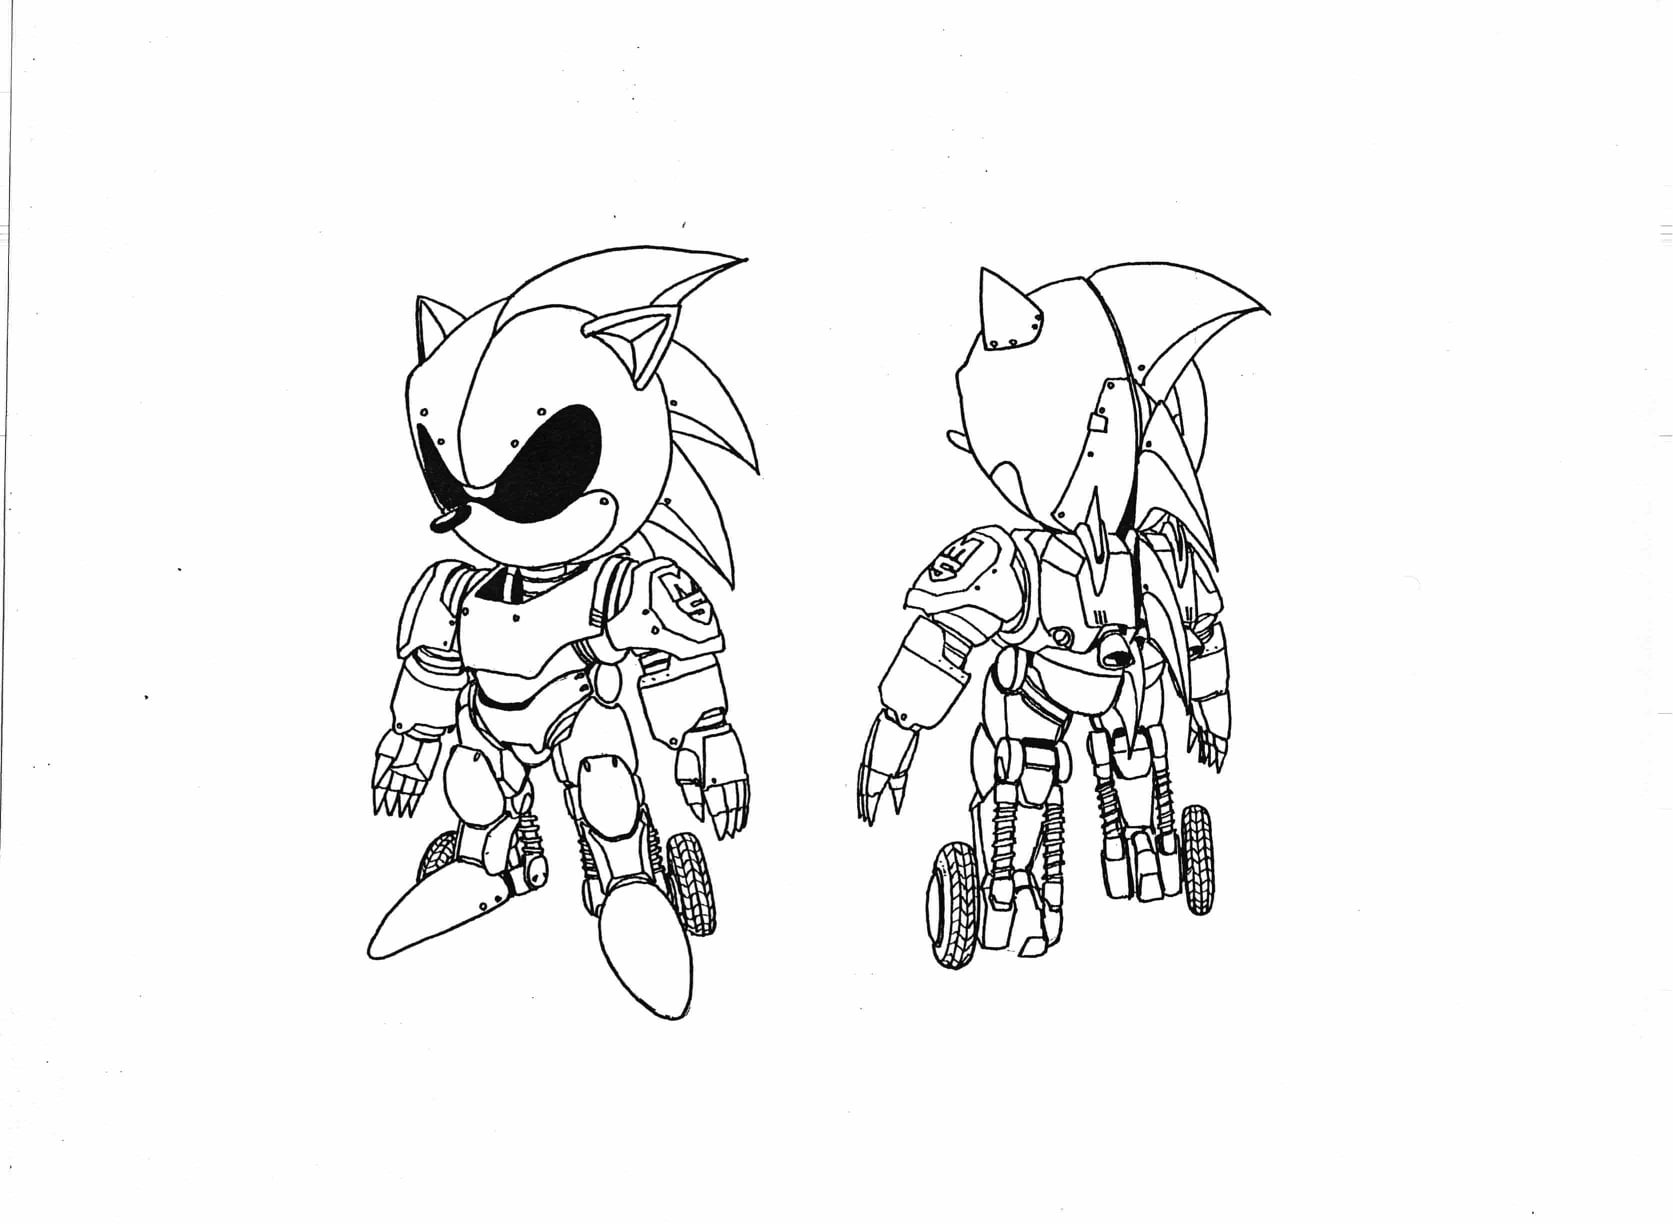 Sonic - Sonic the Hedgehog 2 Coloring Pages - Sonic The Hedgehog